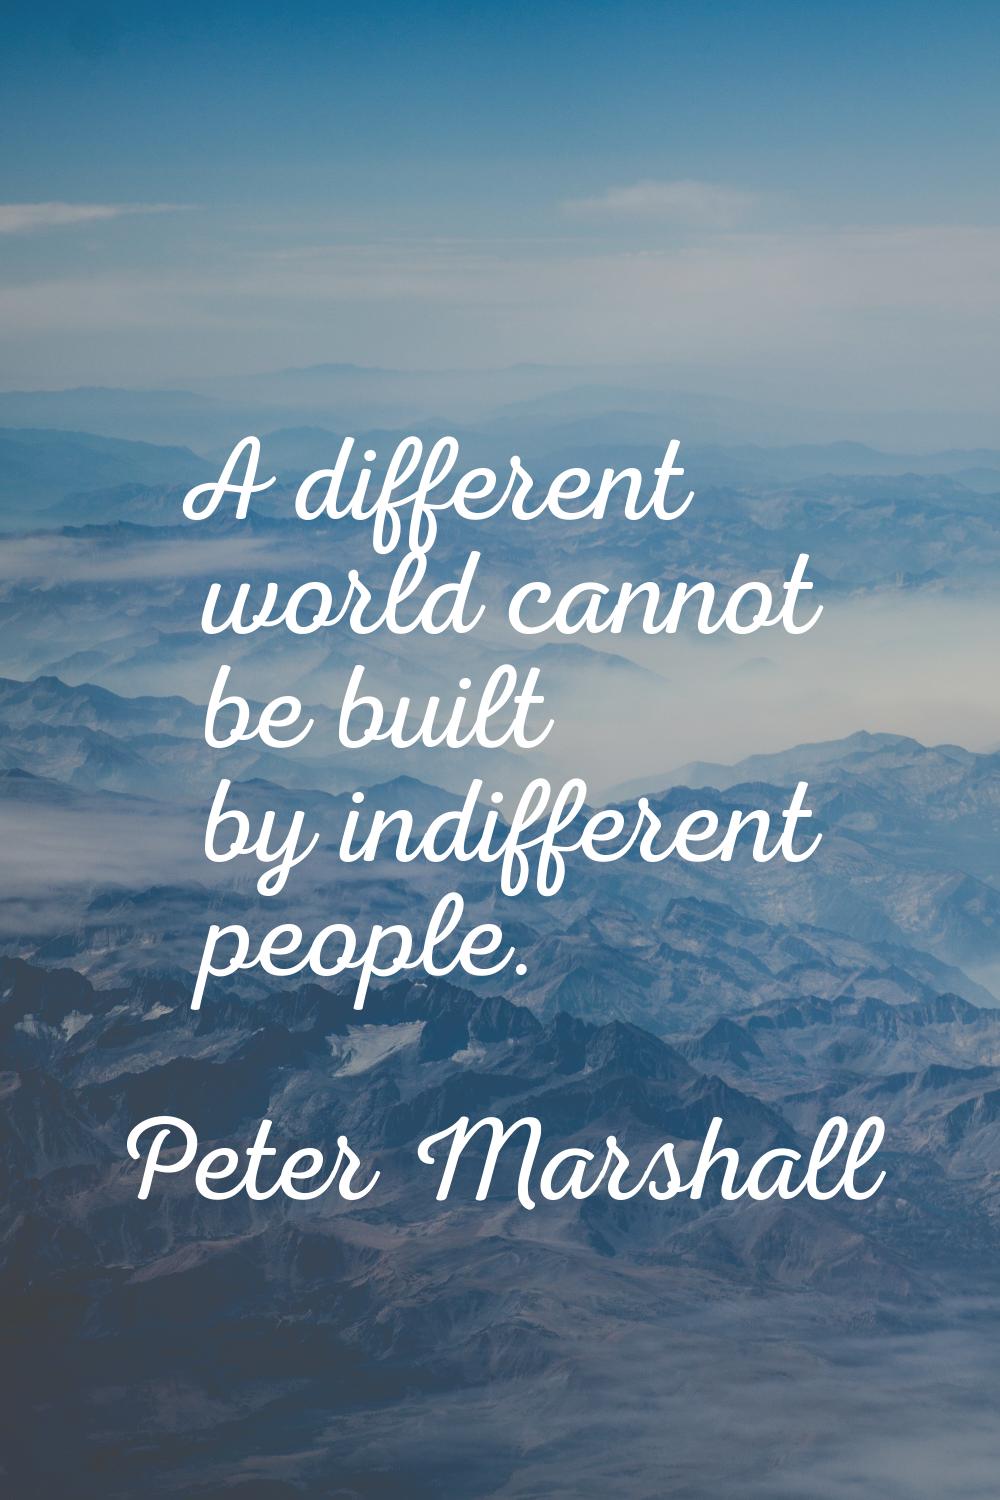 A different world cannot be built by indifferent people.